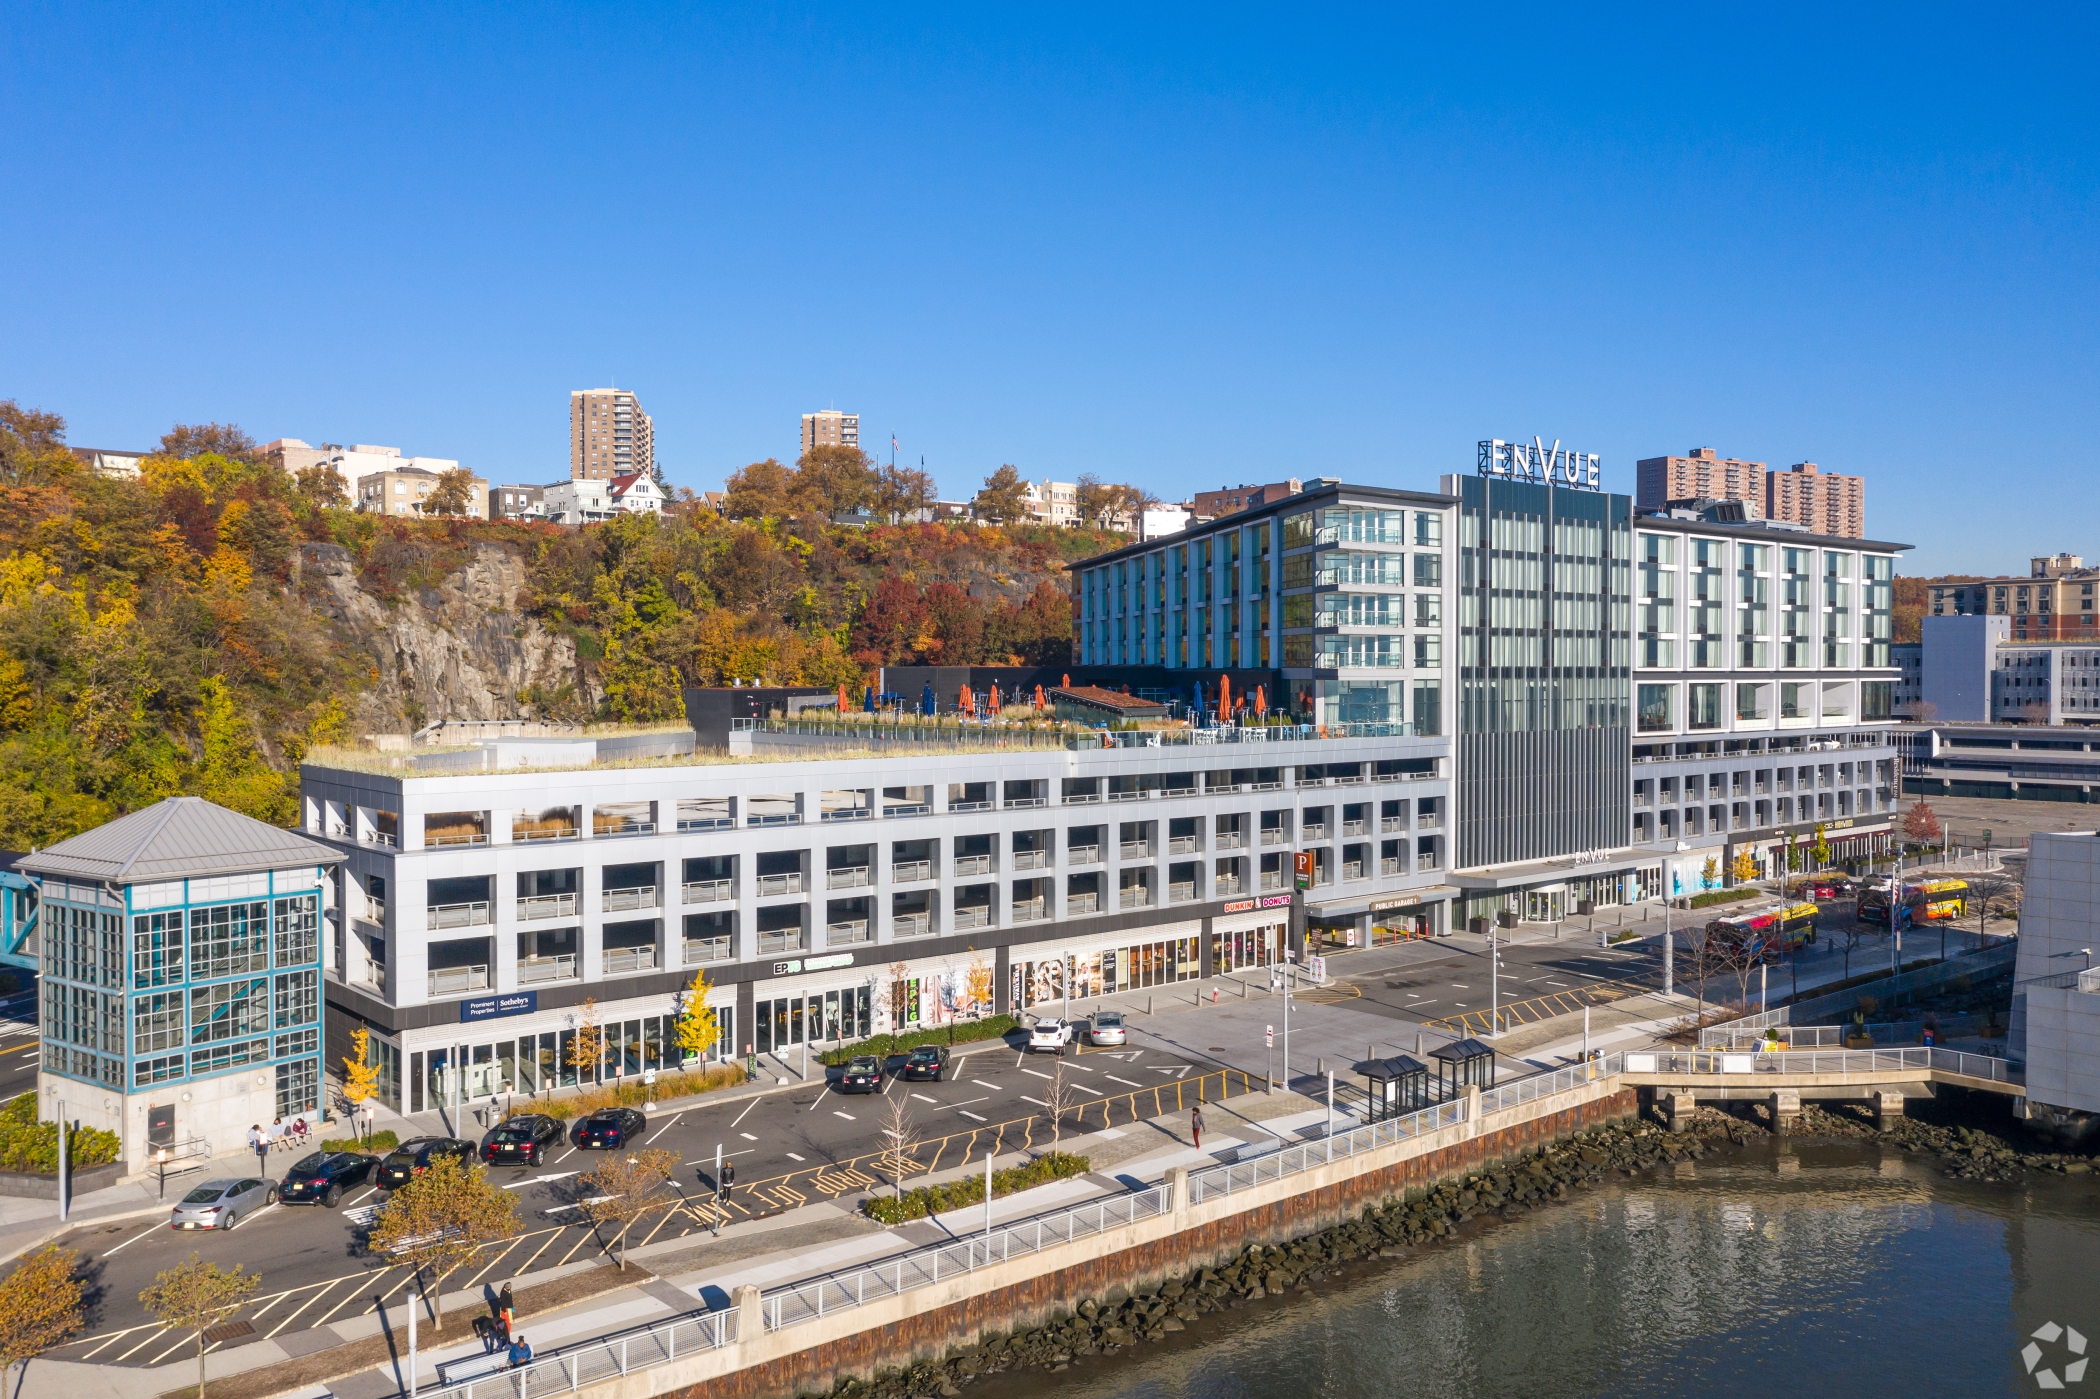 The EnVue hotel that Veris Residential is selling is on the Hudson River waterfront in Weehawken, New Jersey. (CoStar)